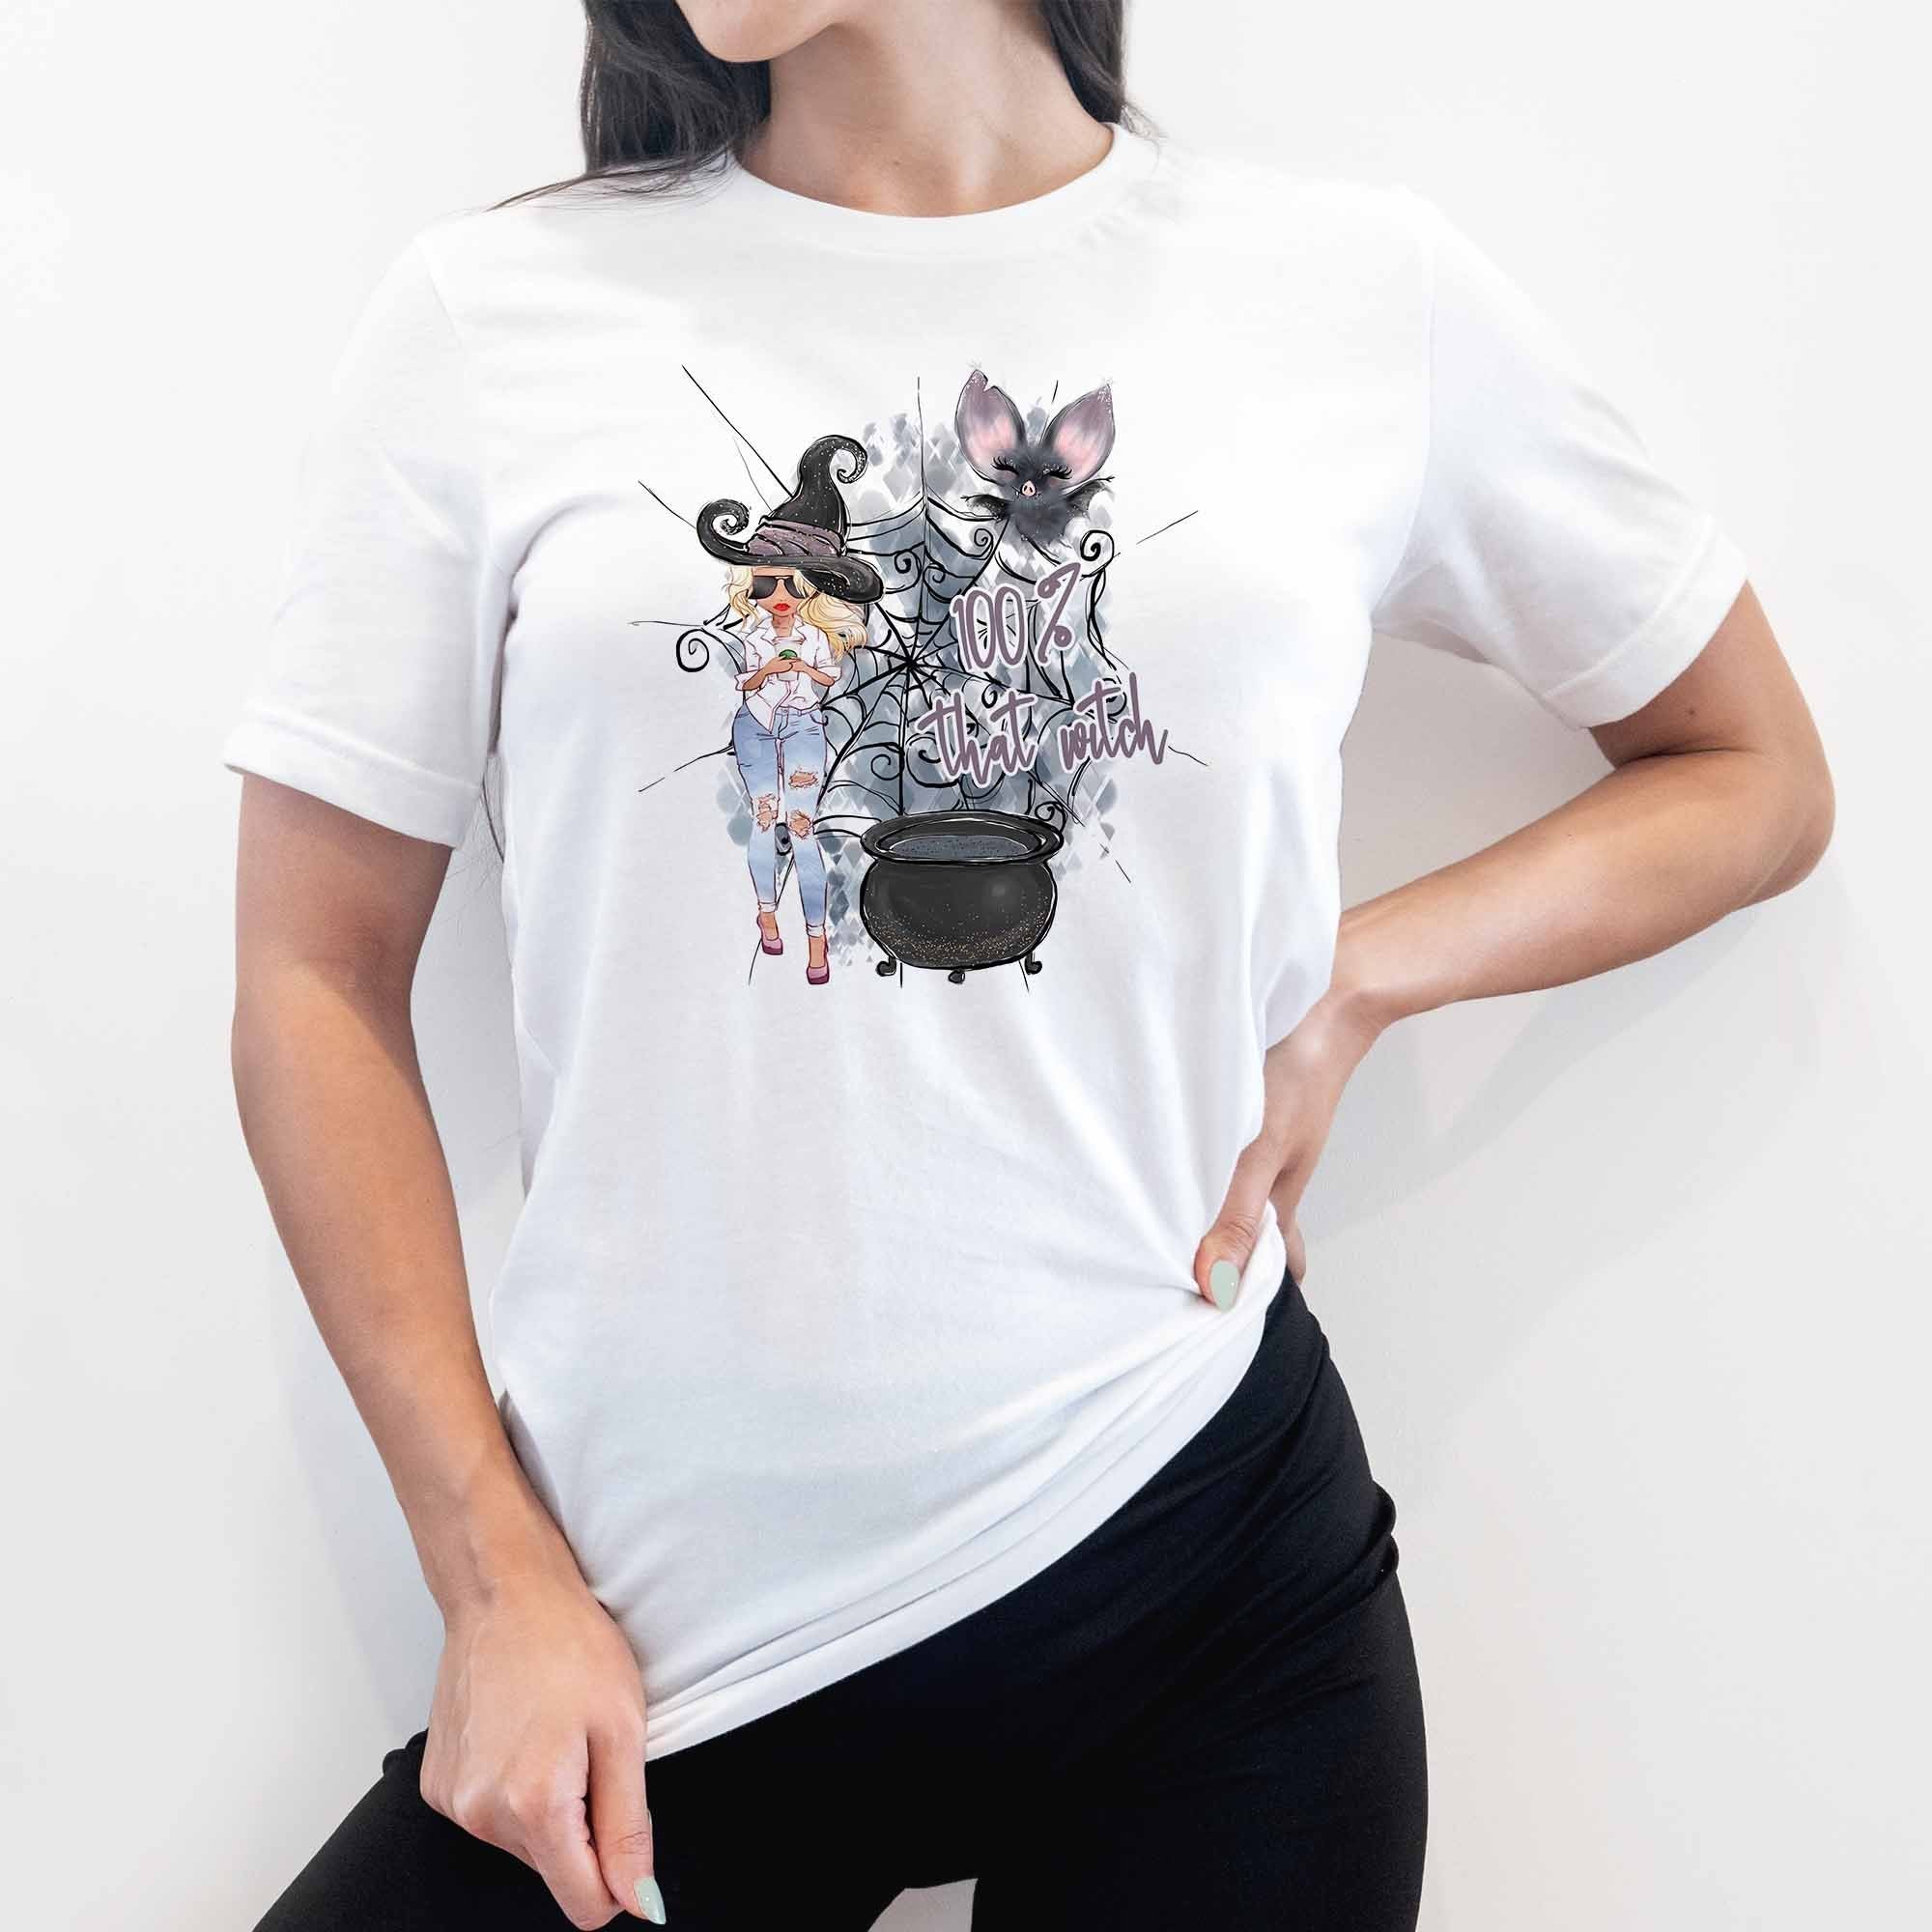 100% That Witch 2 Graphic Tee - My Custom Tee Party